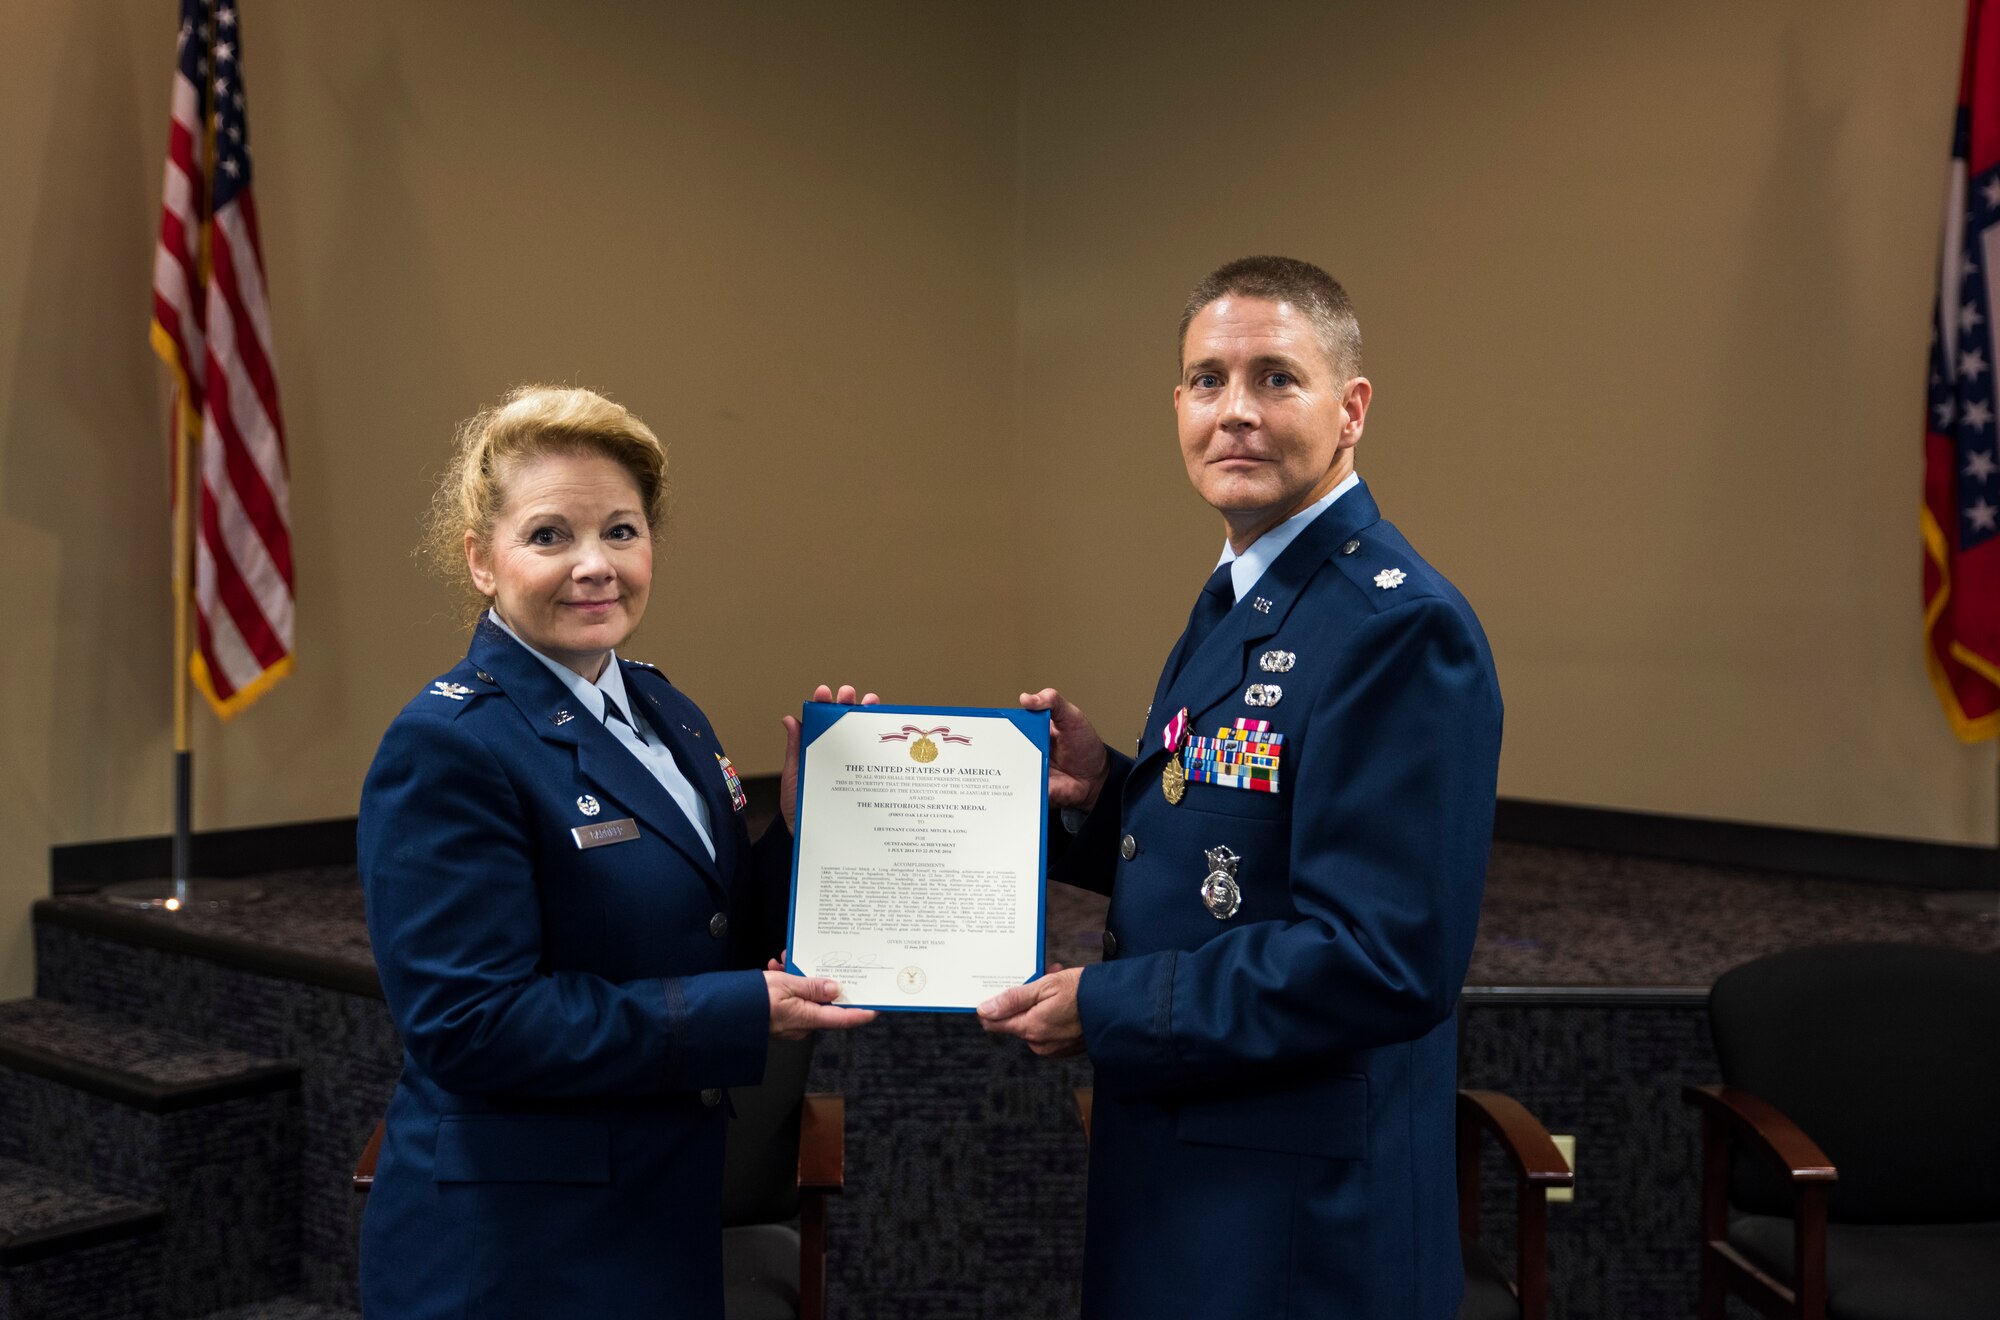 Lt. Col. Mitch Long, 188th Mission Support Group deputy commander and previous 188th Security Forces commander, is awarded the Meritorious Service Medal, first oak leaf cluster, by Col. Tenise Gardner, 188th MSG commander, June 26, 2016, for his outstanding achievement as commander of the 188th SFS at Ebbing Air National Guard Base, Fort Smith, Ark. Maj. Heath Allen, previous 188th Wing executive officer, took command of the 188th SFS during the ceremony. (U.S. Air National Guard photo by Senior Airman Cody Martin/Released)